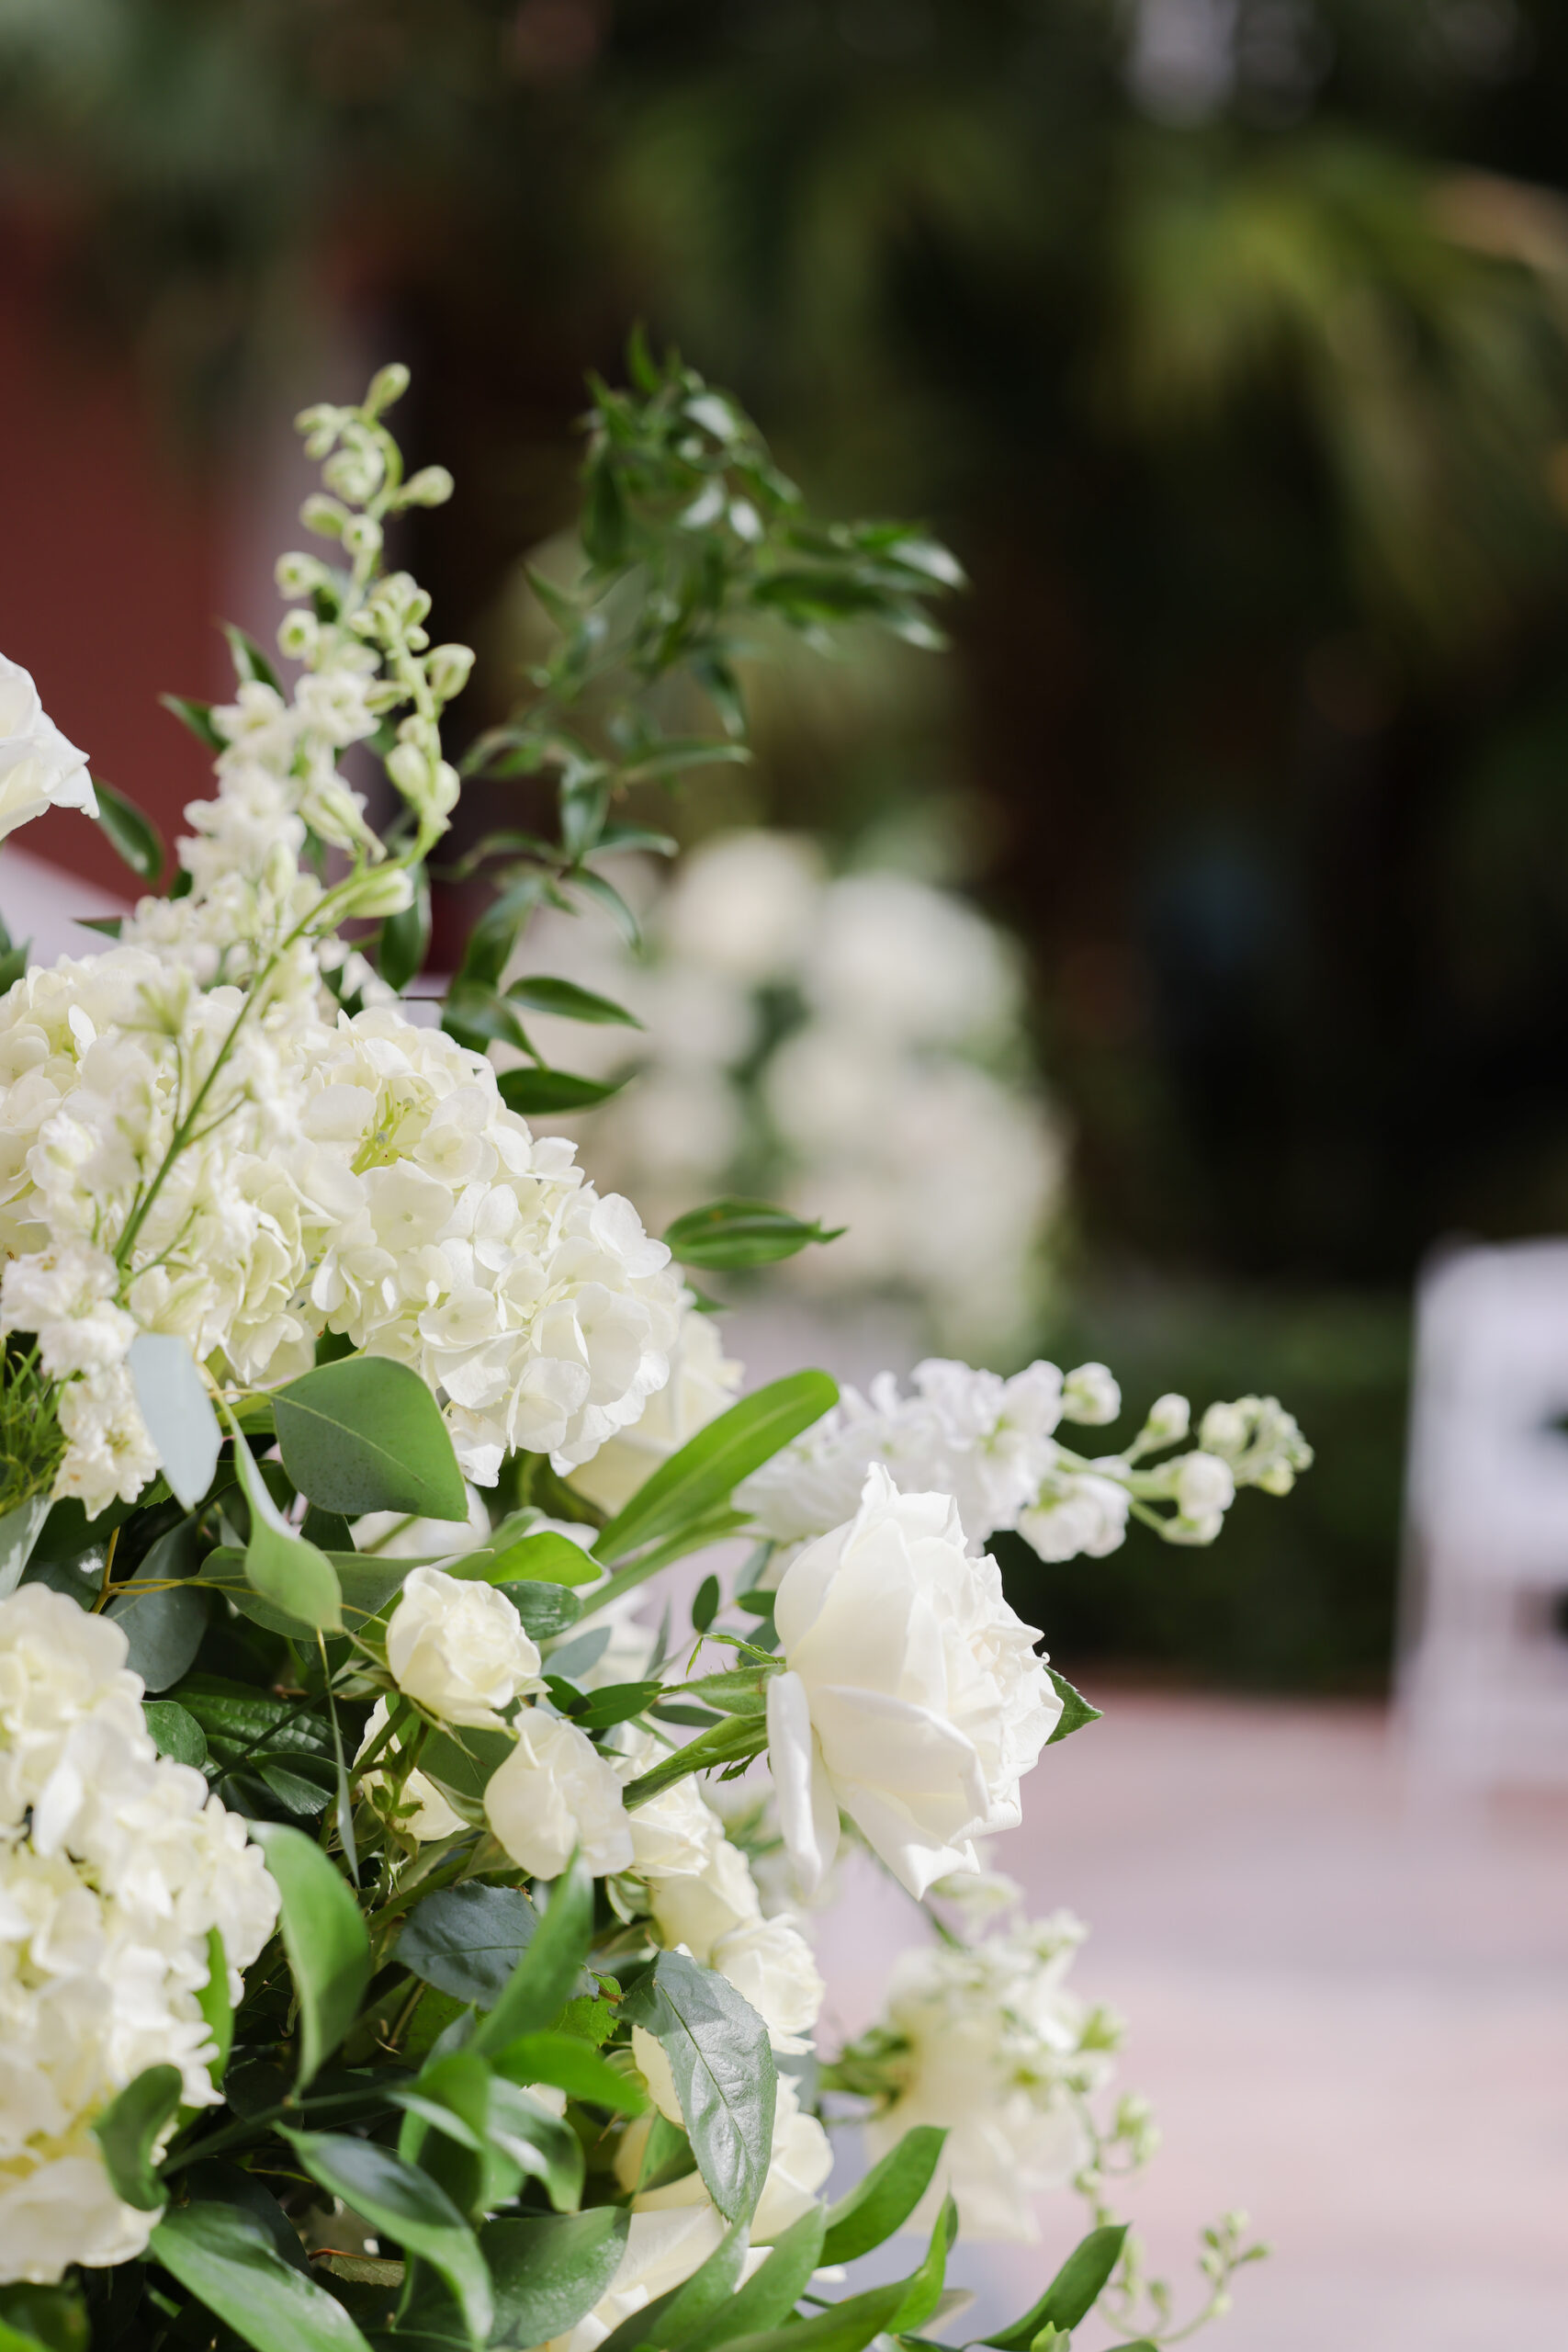 Classic White Rose and Snapdragon with Greenery Wedding Ceremony Floral Arrangements Inspiration | Tampa Bay Florist Bruce Wayne Florals